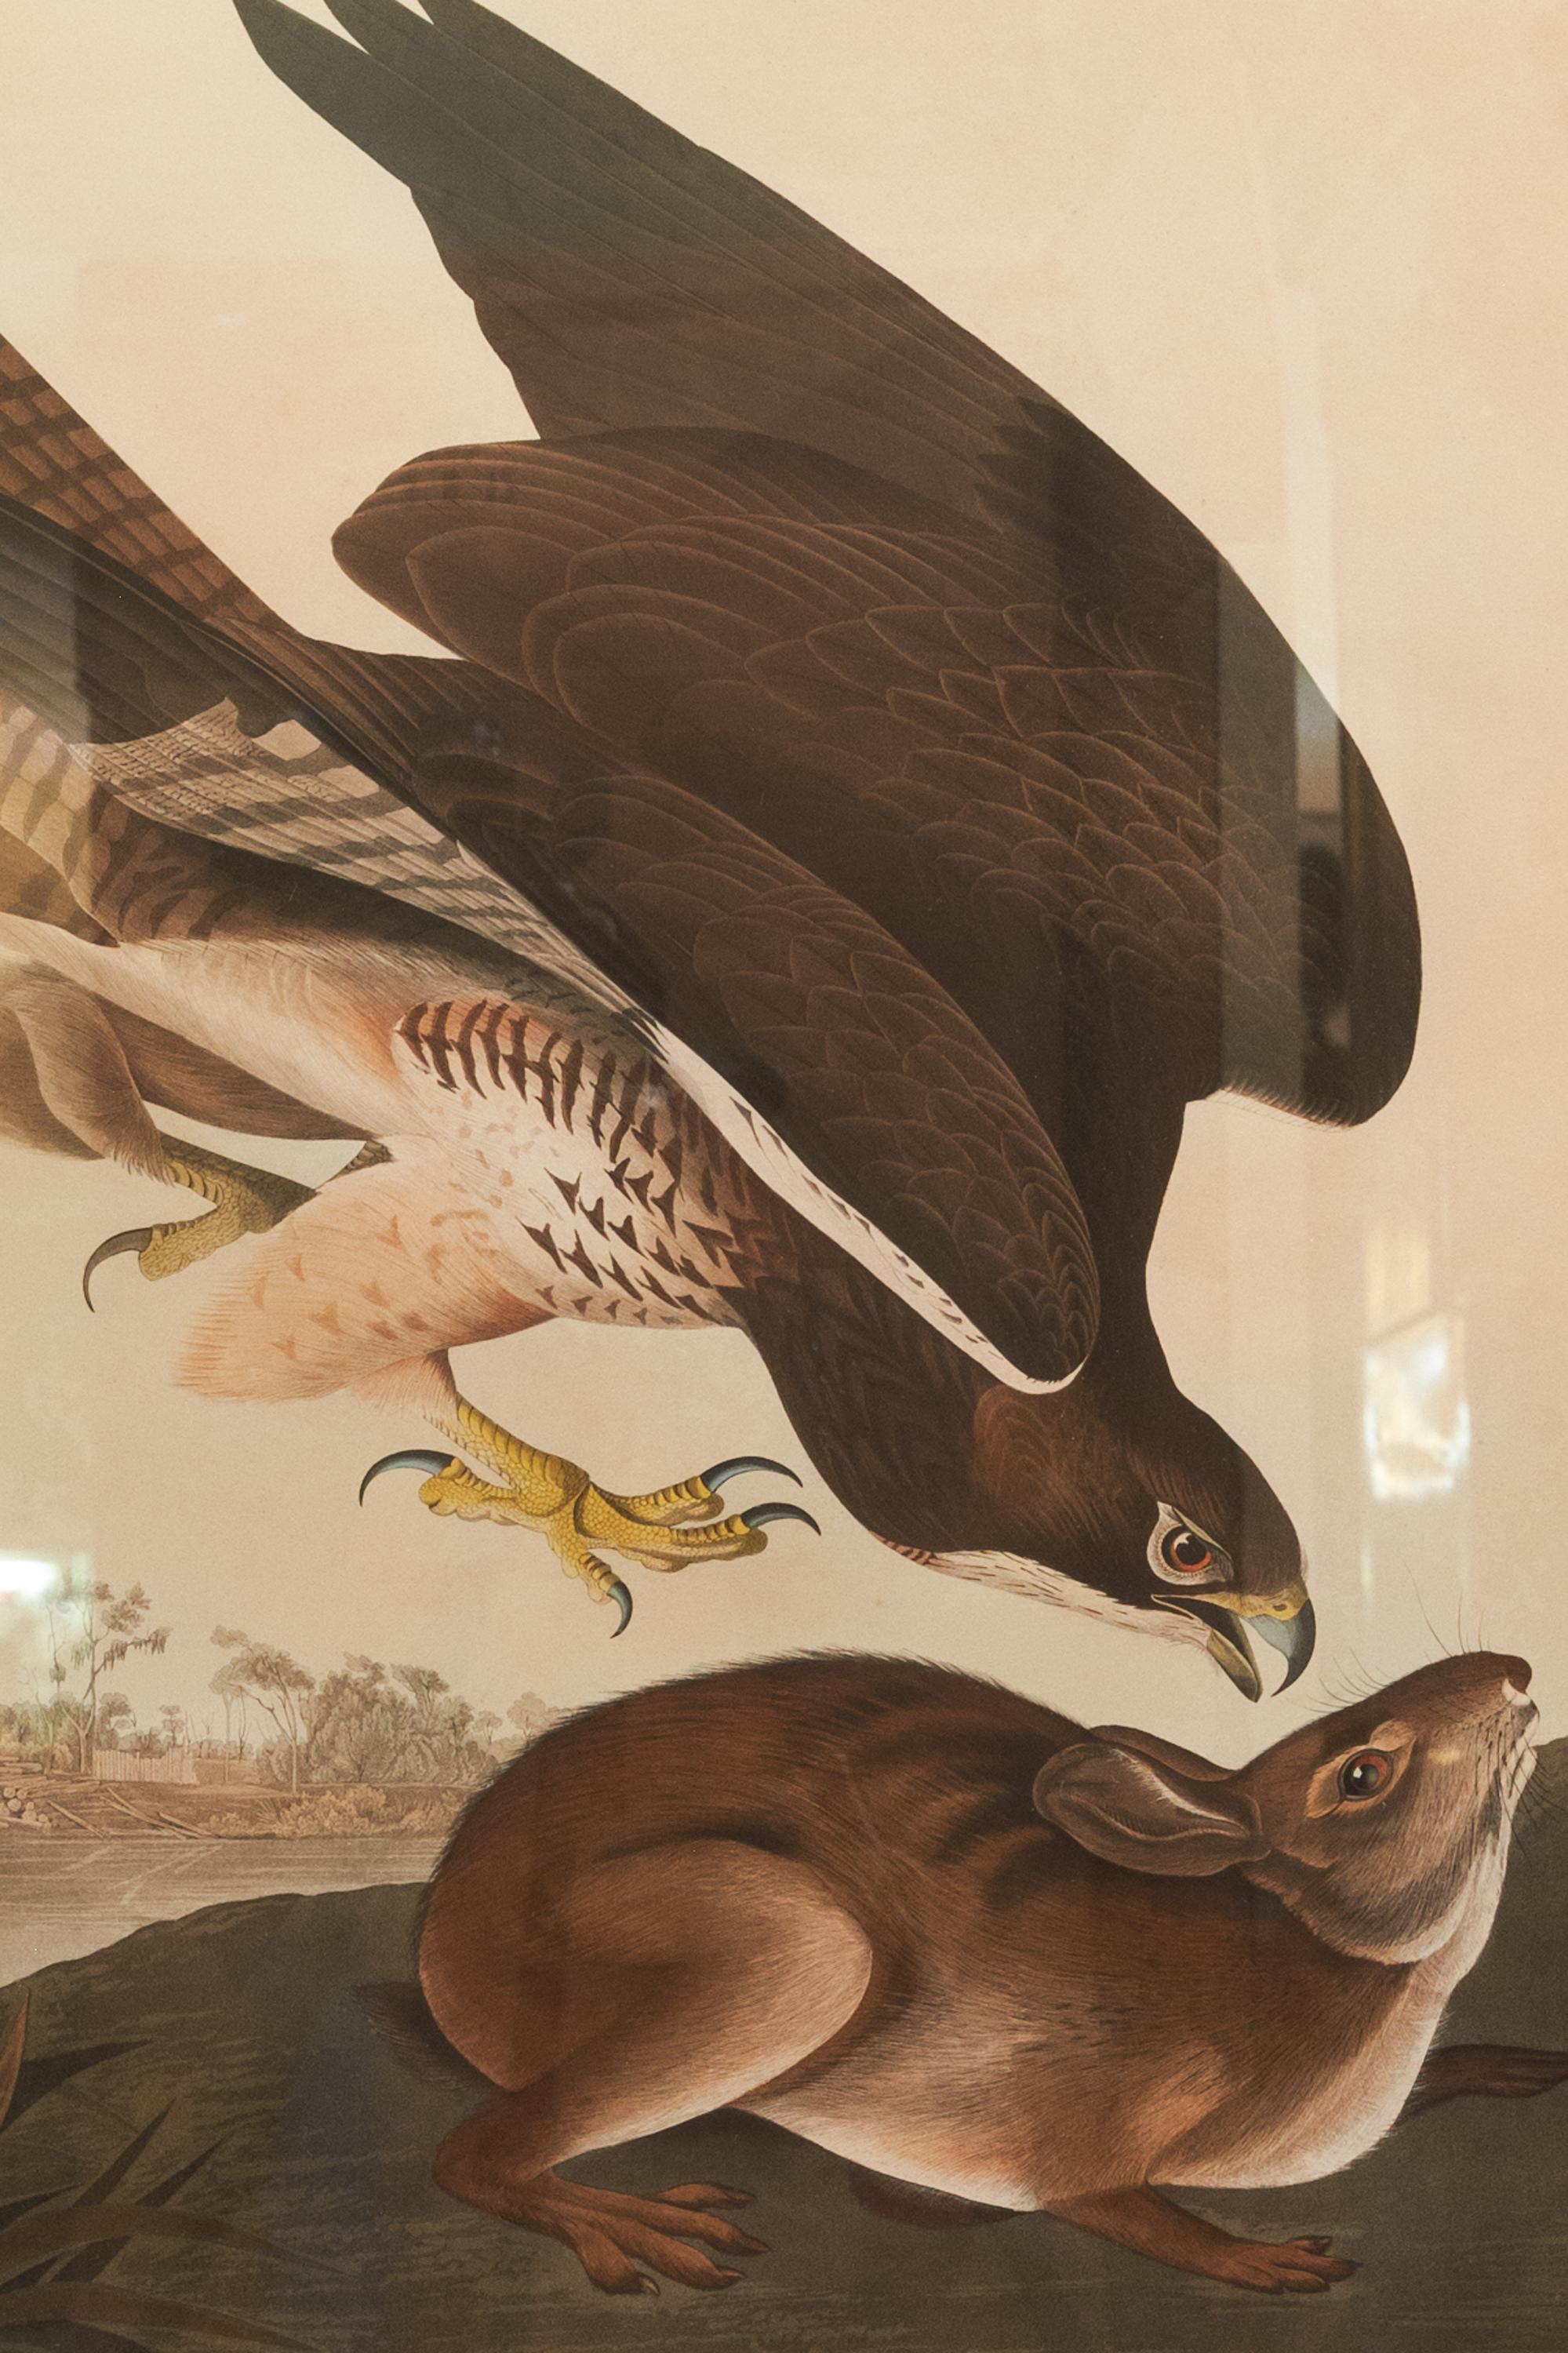 Early 19th Century Hawk and Rabbit Drawing by John James Audubon
Birds of America, Havell Edition, circa 1837
Plate 372: 